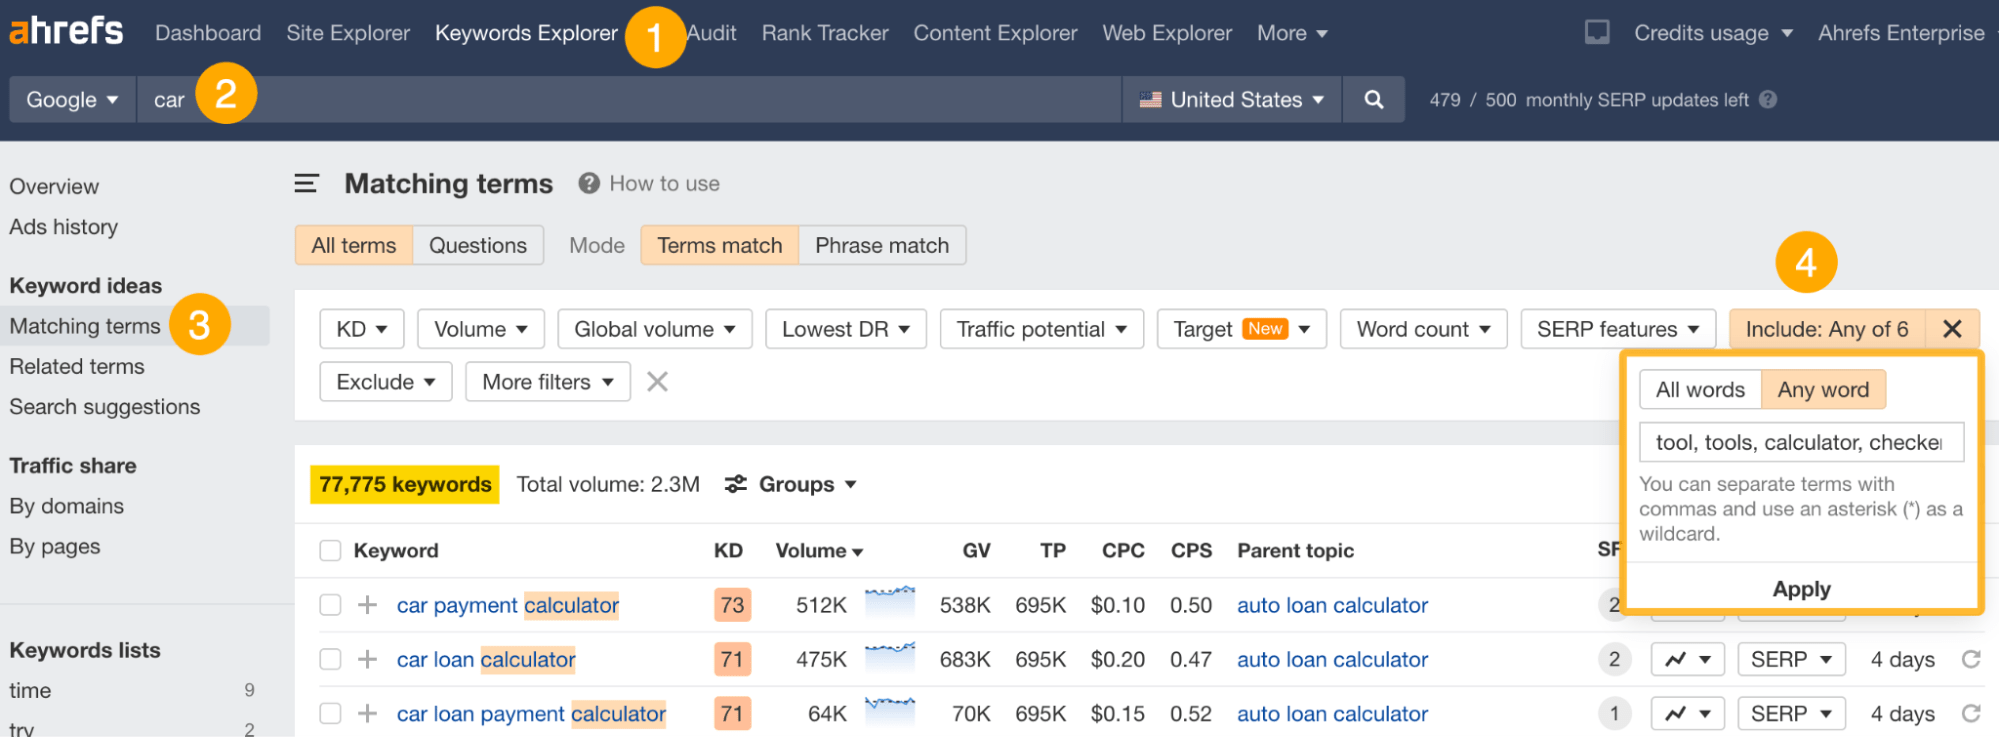 Finding tool-related keywords with Ahrefs' Keywords Explorer
